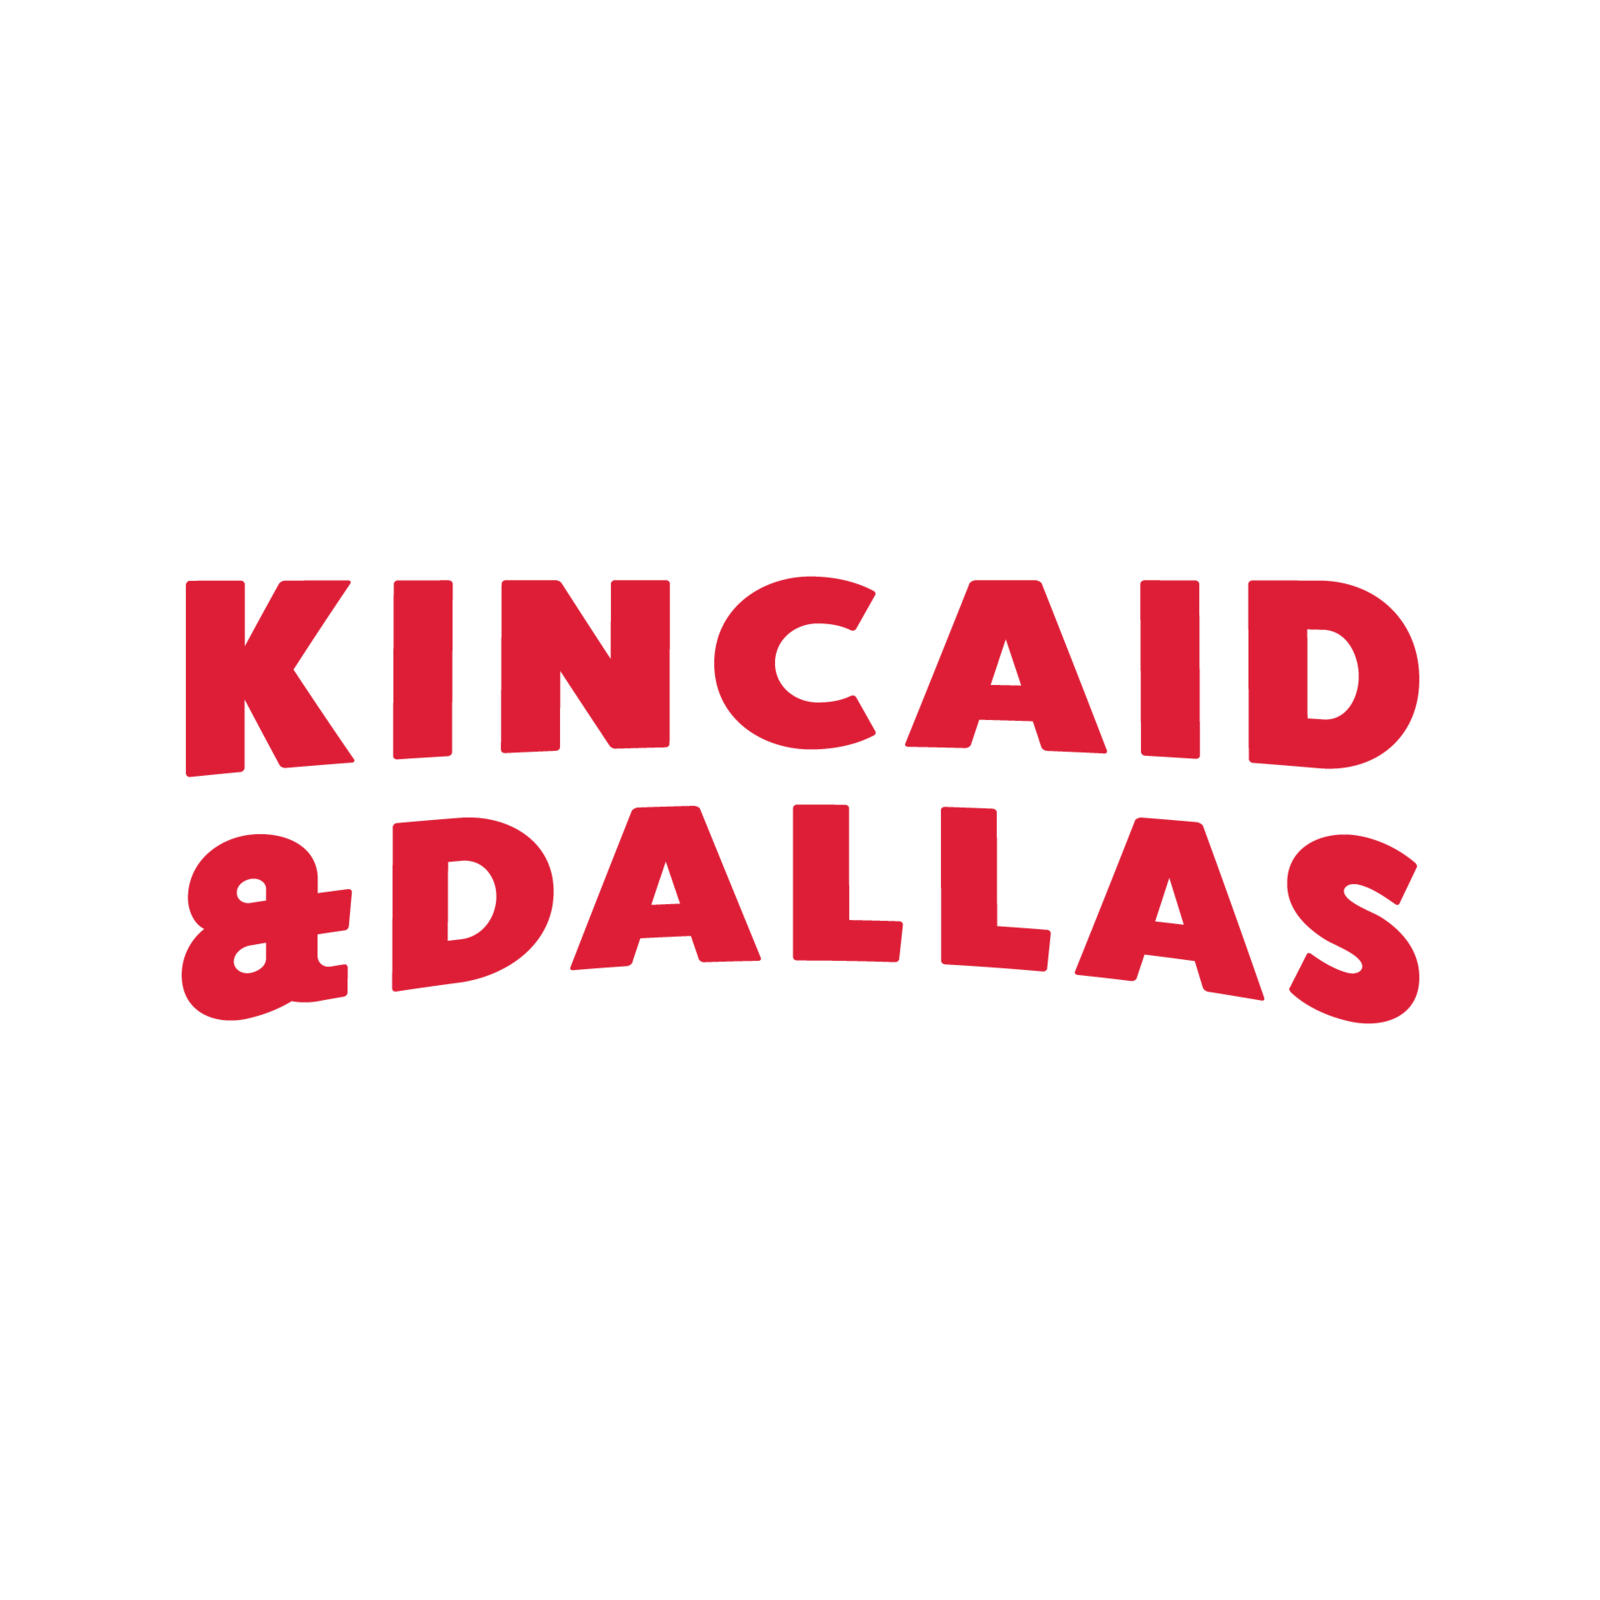 Today on Kincaid and Dallas - Thursday, October 27th